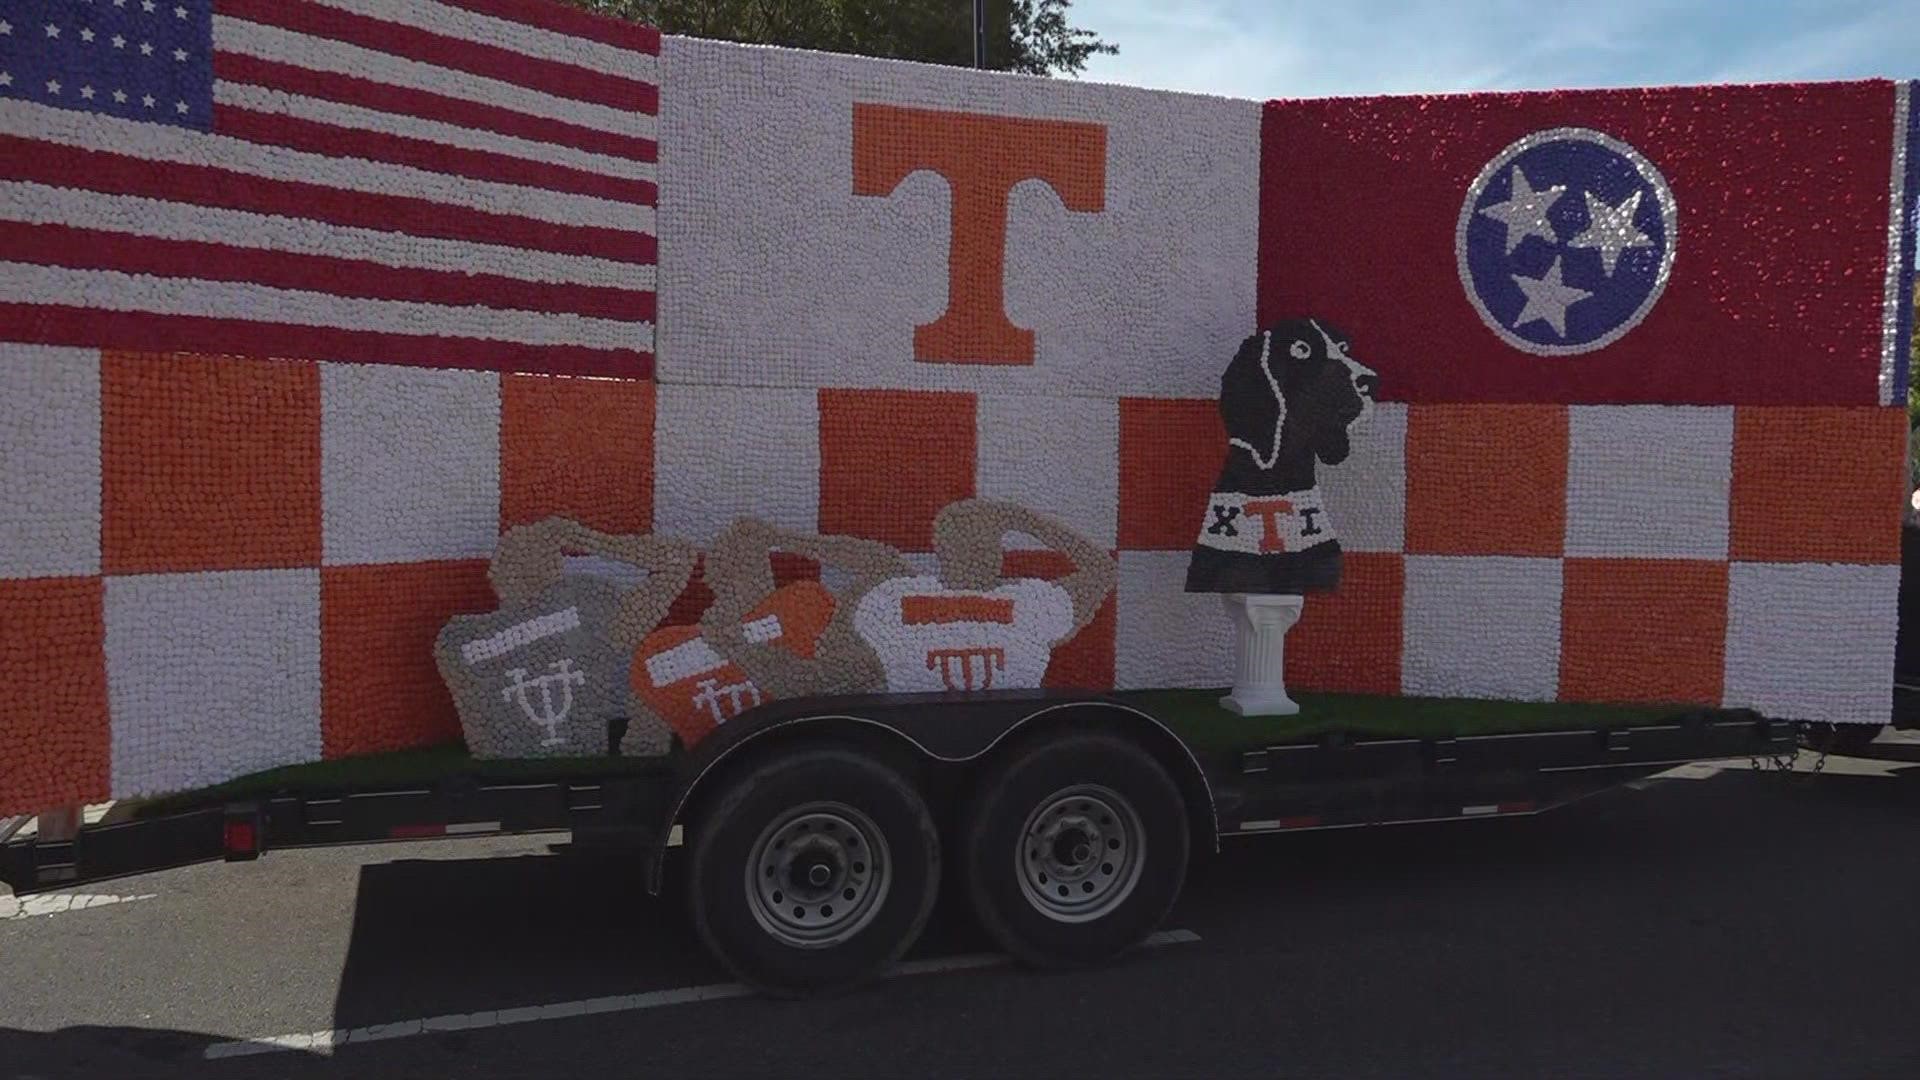 Fraternities and Sororities, along with other groups at the University of Tennessee, created homecoming floats using tissue paper, glue and plywood.